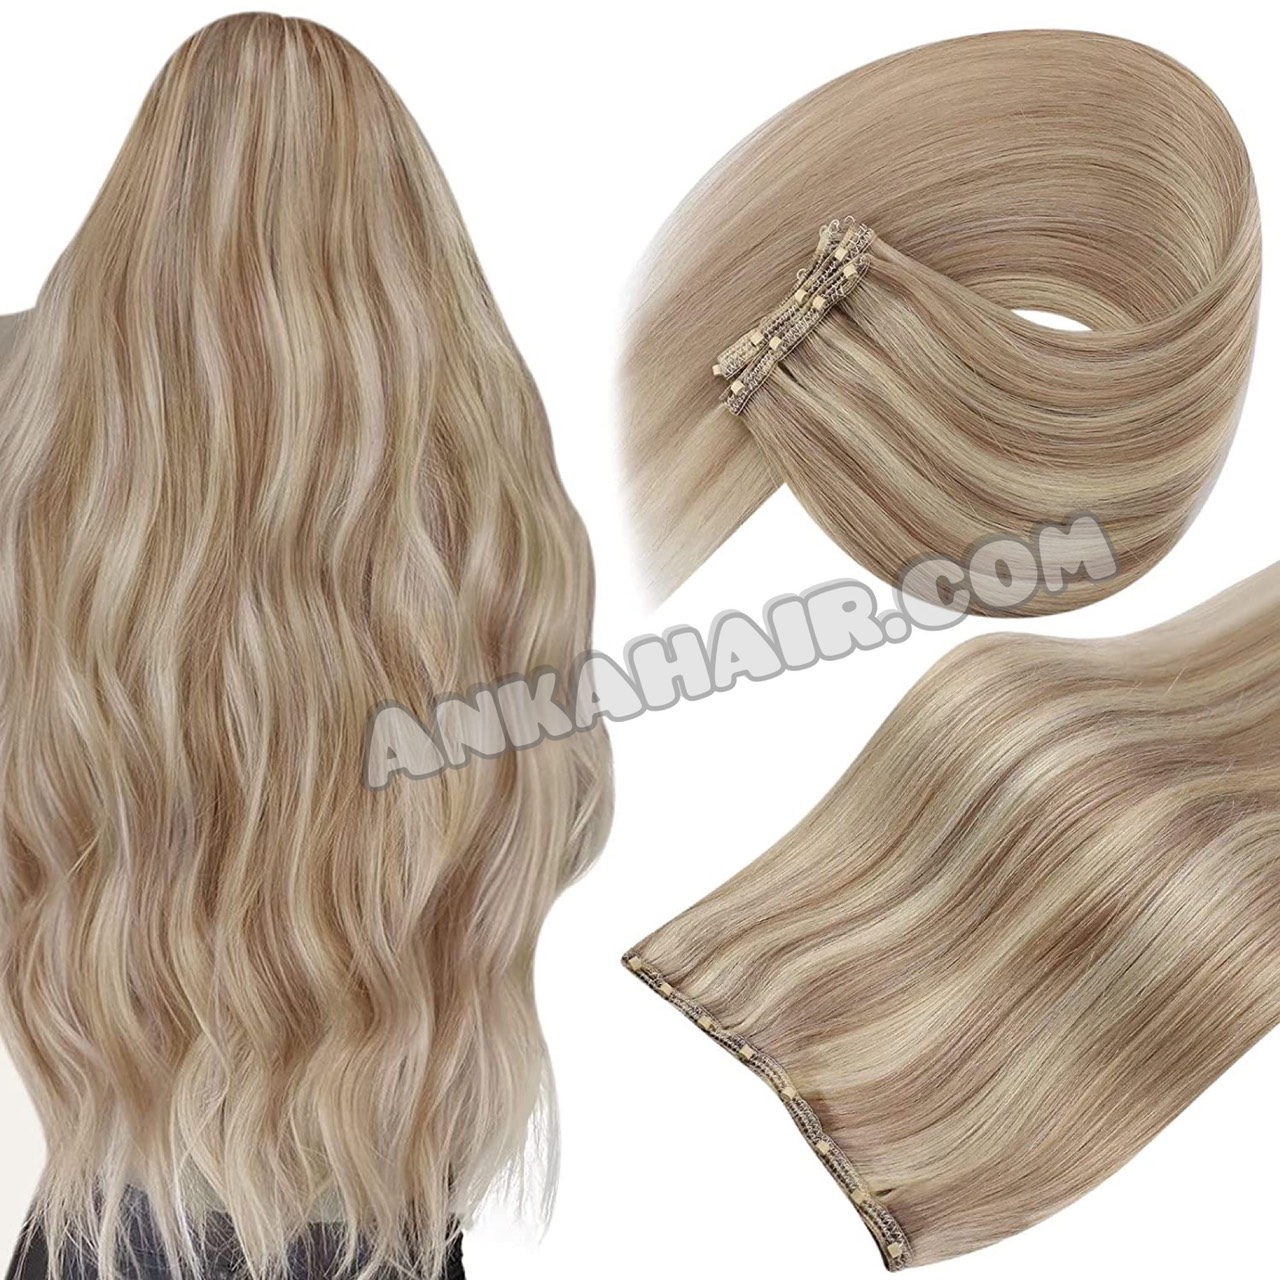 Weft hair or Tape-in hair: Which is the best hair extension? - Anka Hair